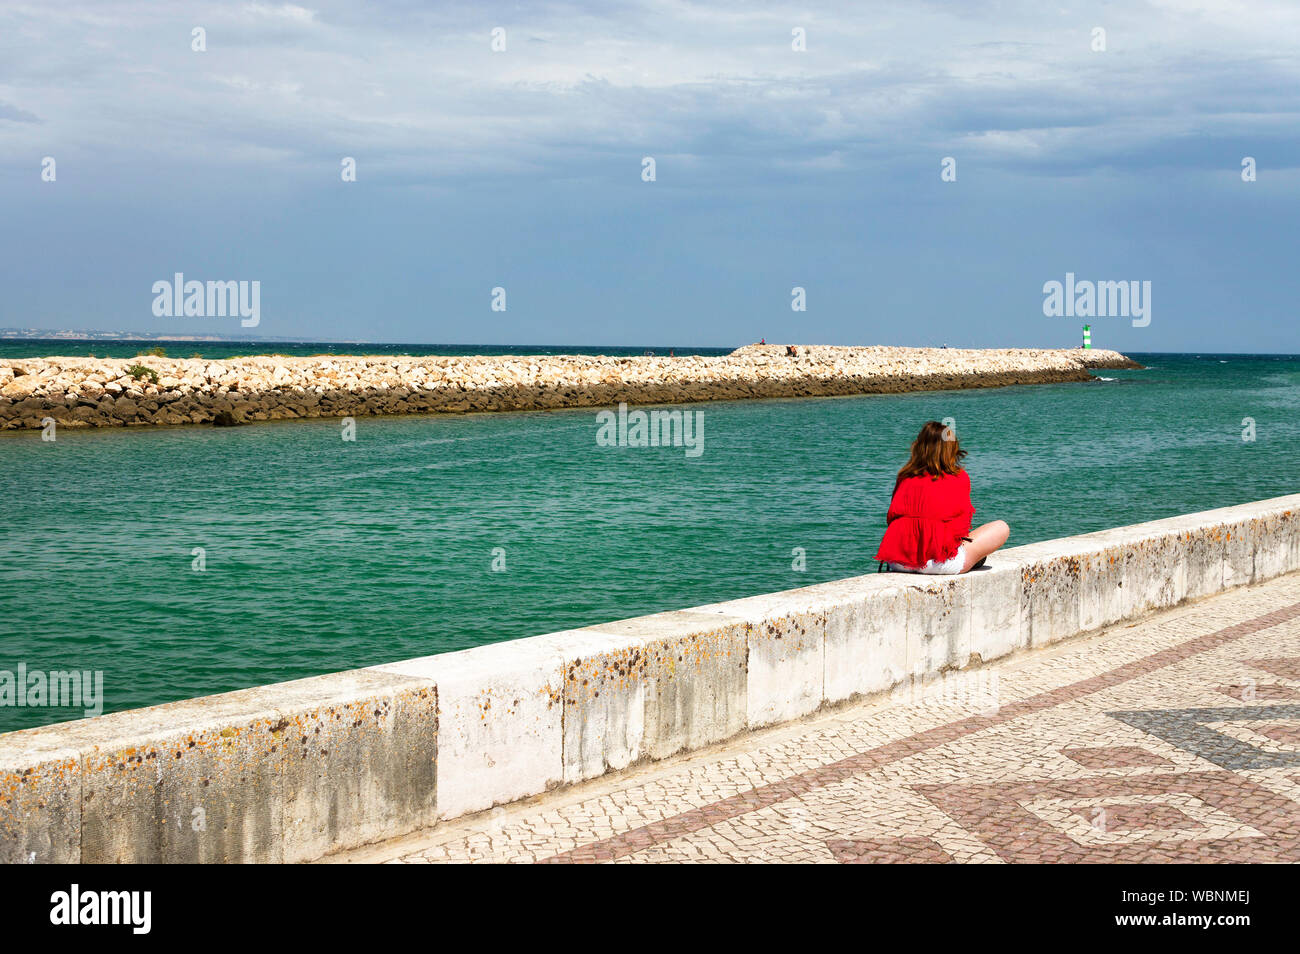 Rear View Of Woman Overlooking Calm Blue Sea Stock Photo